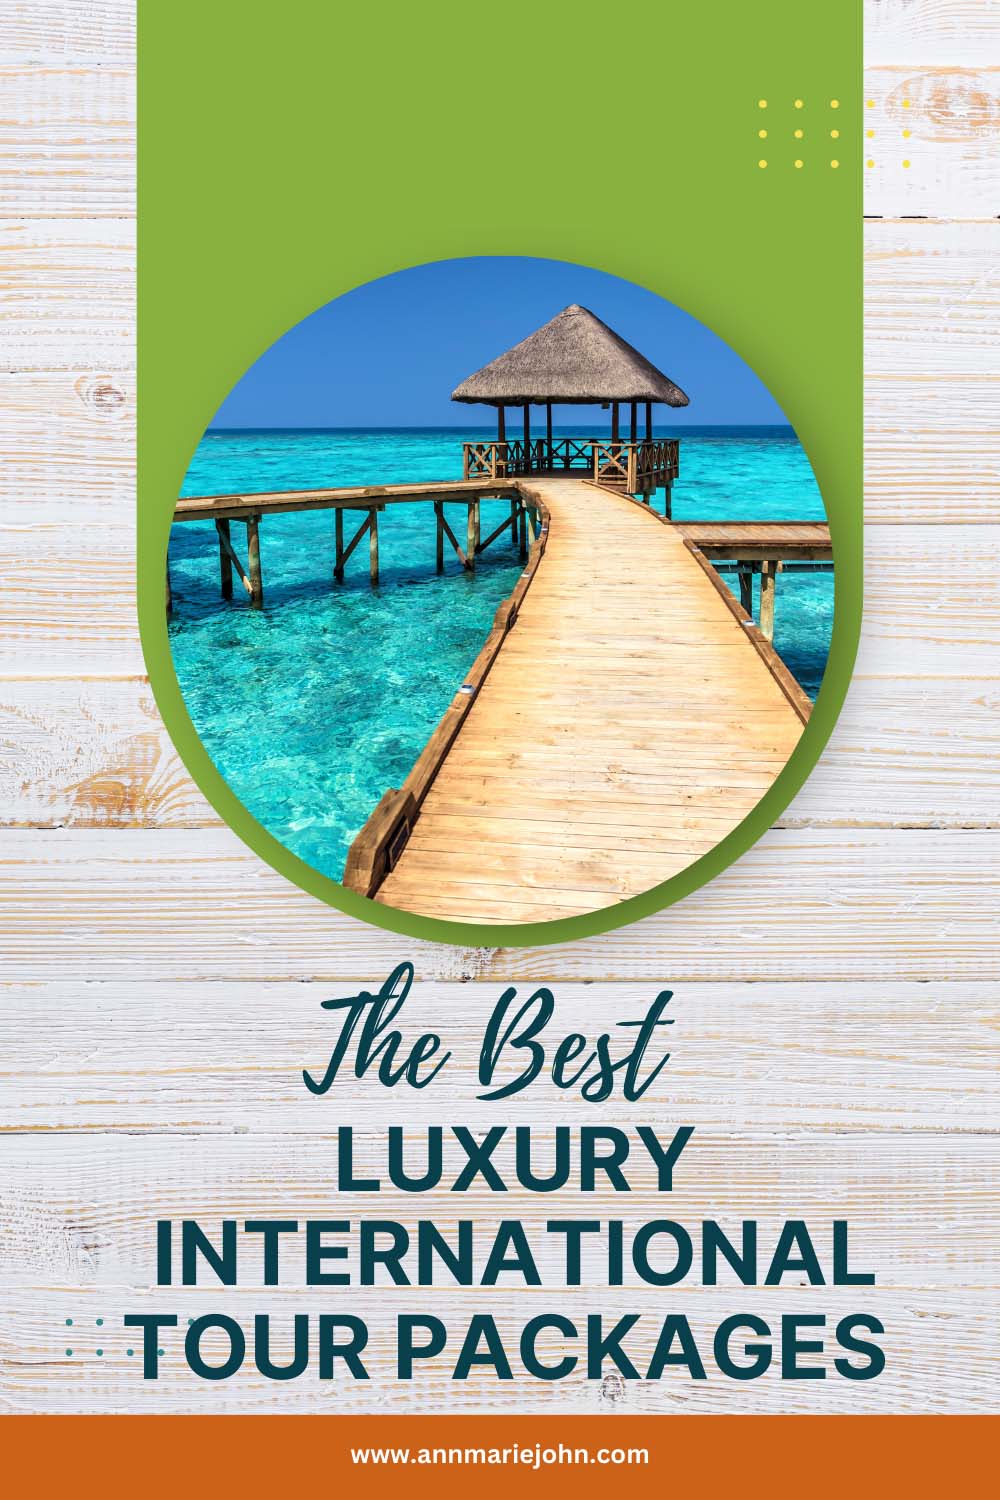 The Best Luxury International Tour Packages